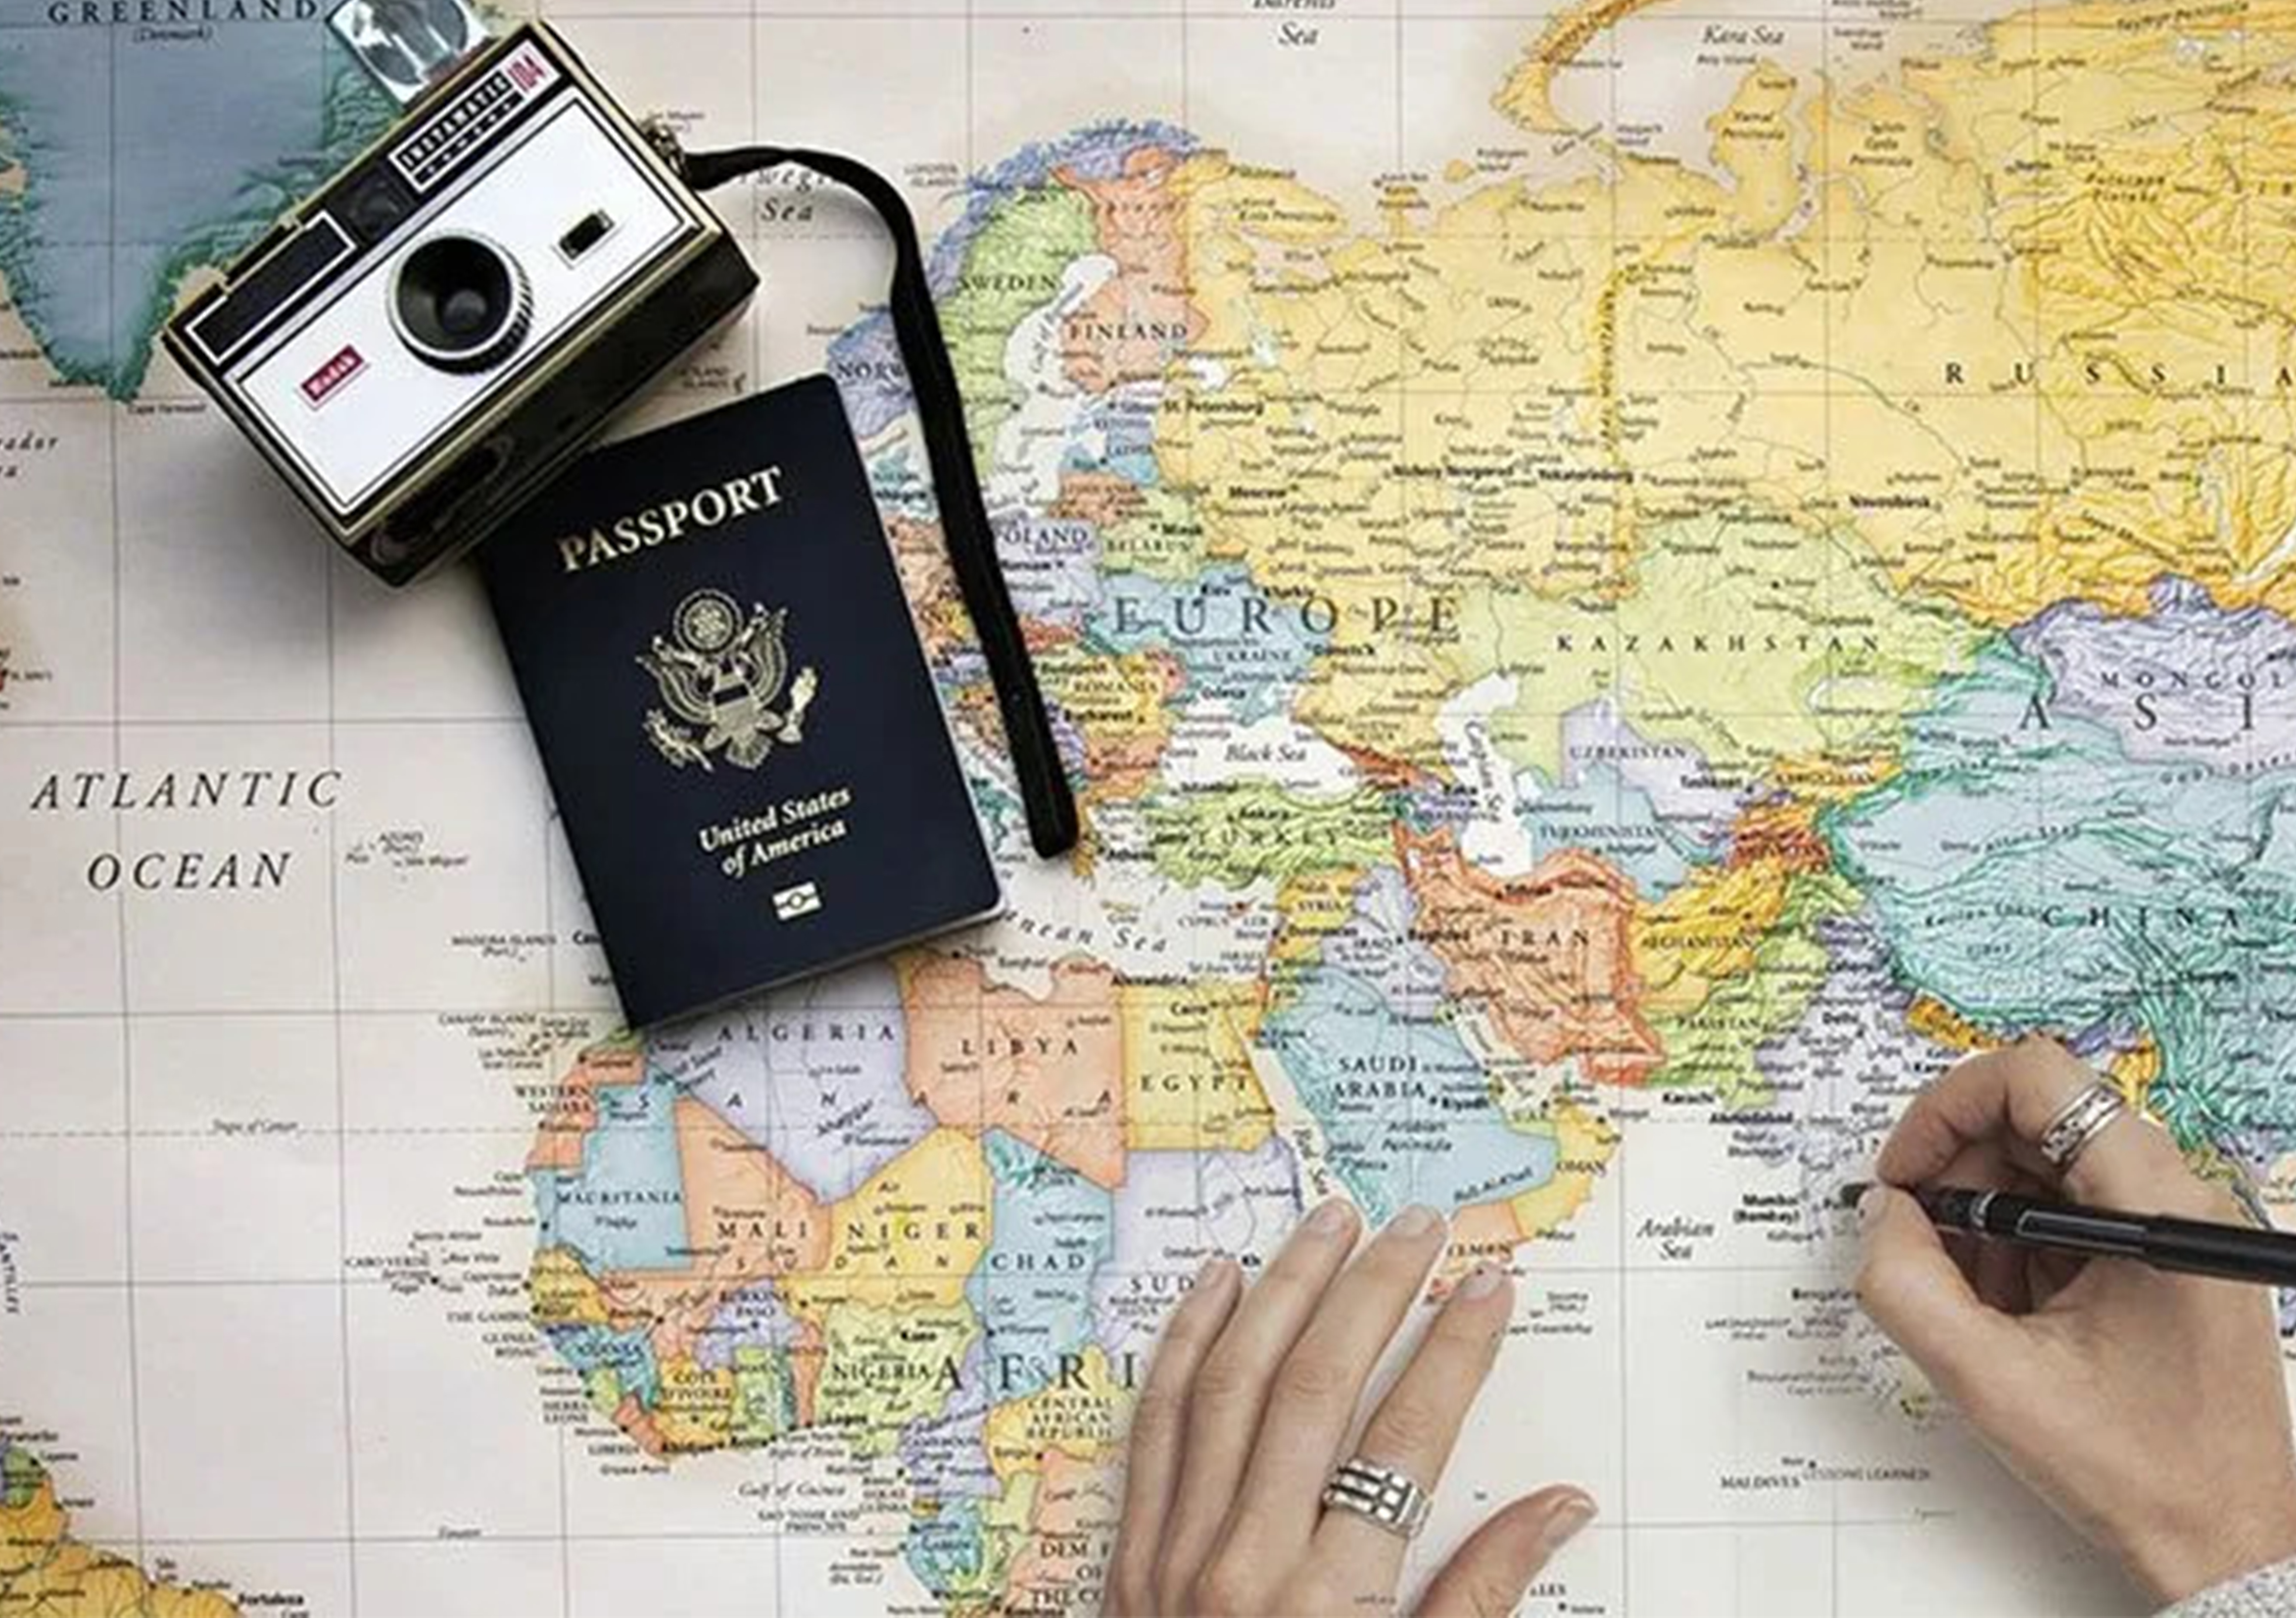 camera, passport, and map with someone writing